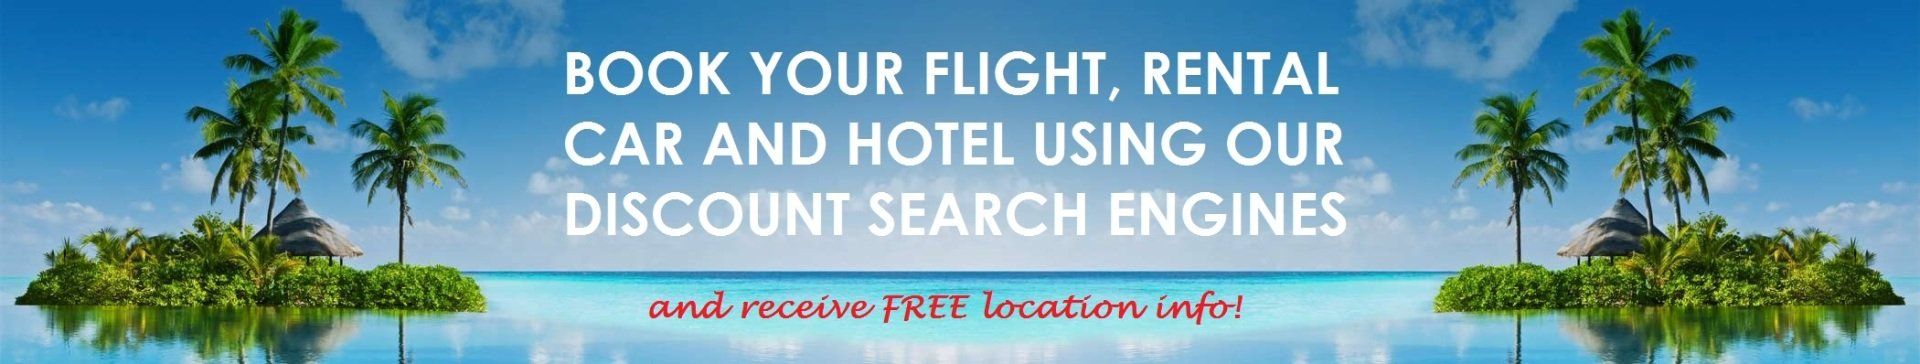 Book your flight, rental car and hotel using our discount search engines